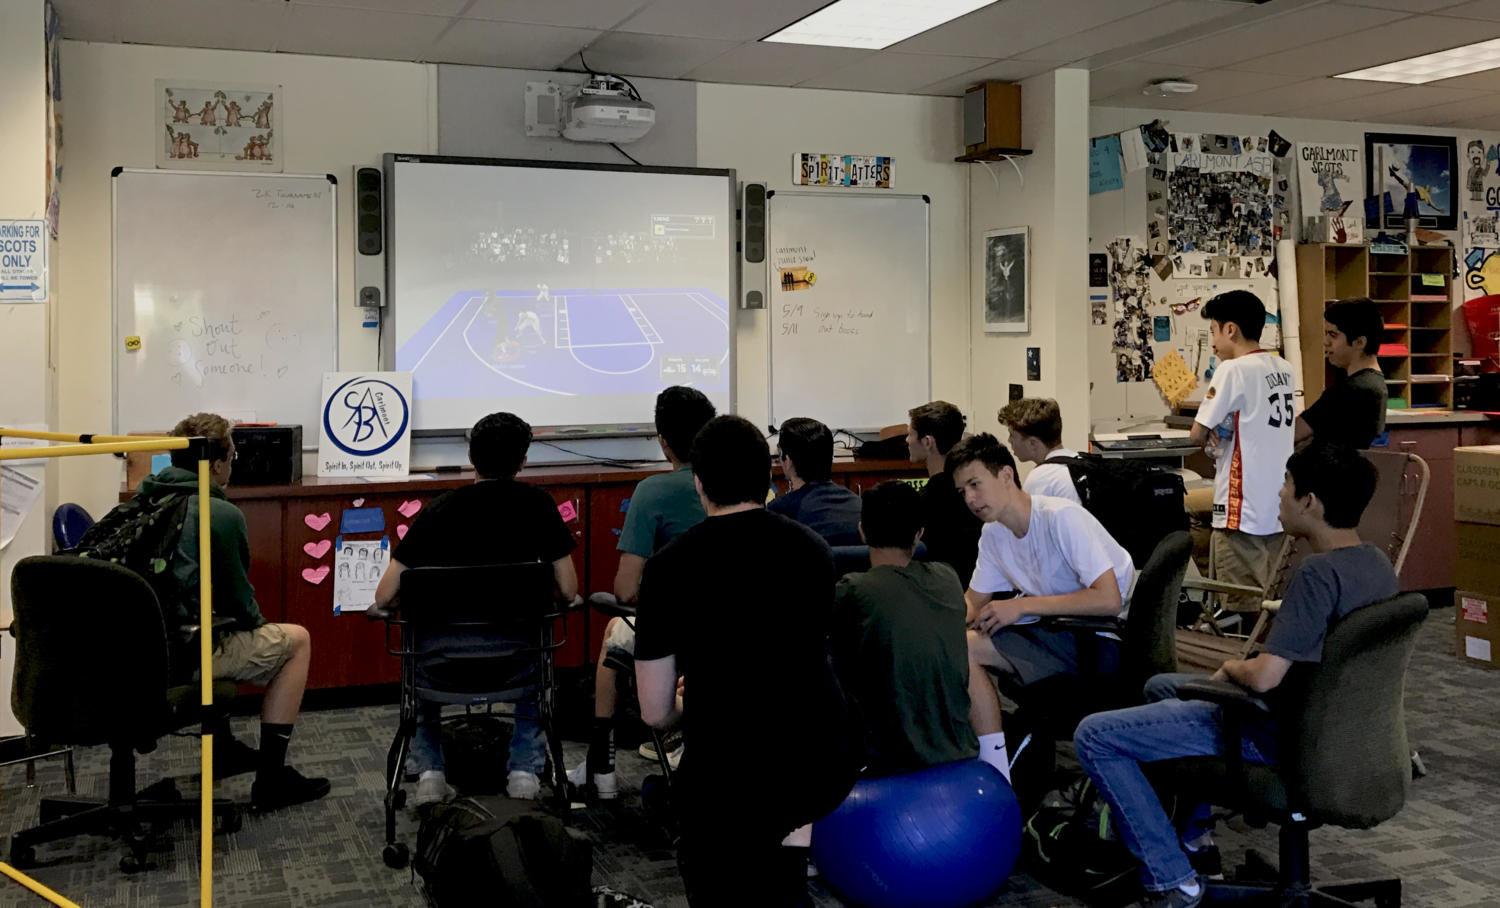 Student competitors and observers gather in the ASB room to watch a NBA 2k17 match.